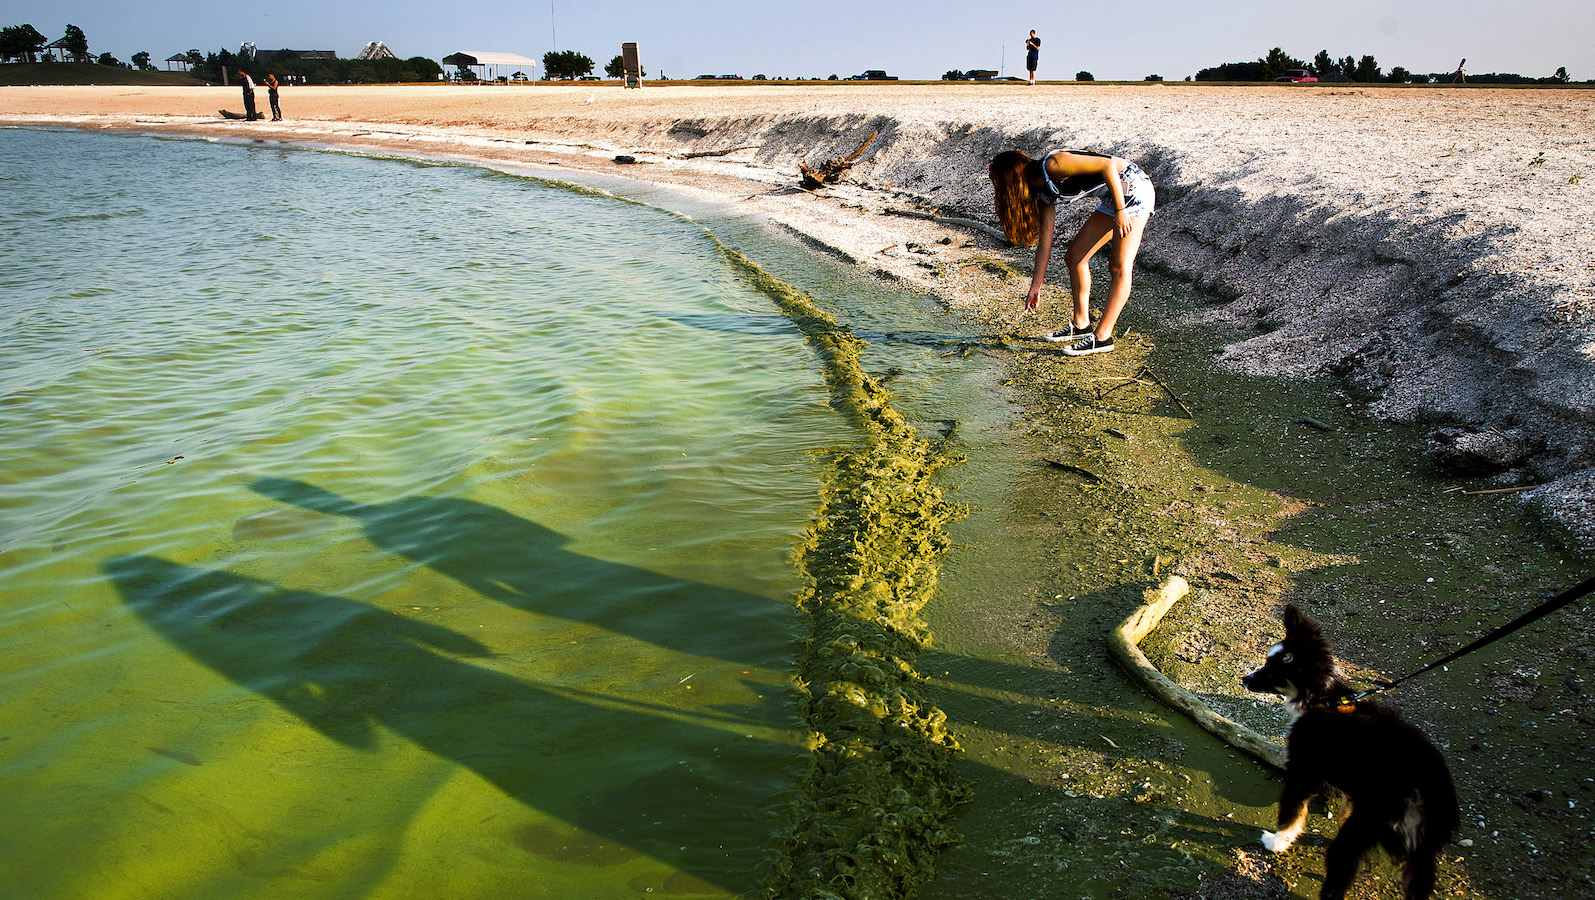 Poisonous algal blooms are driving up drinking water fees in the Terrific Lakes